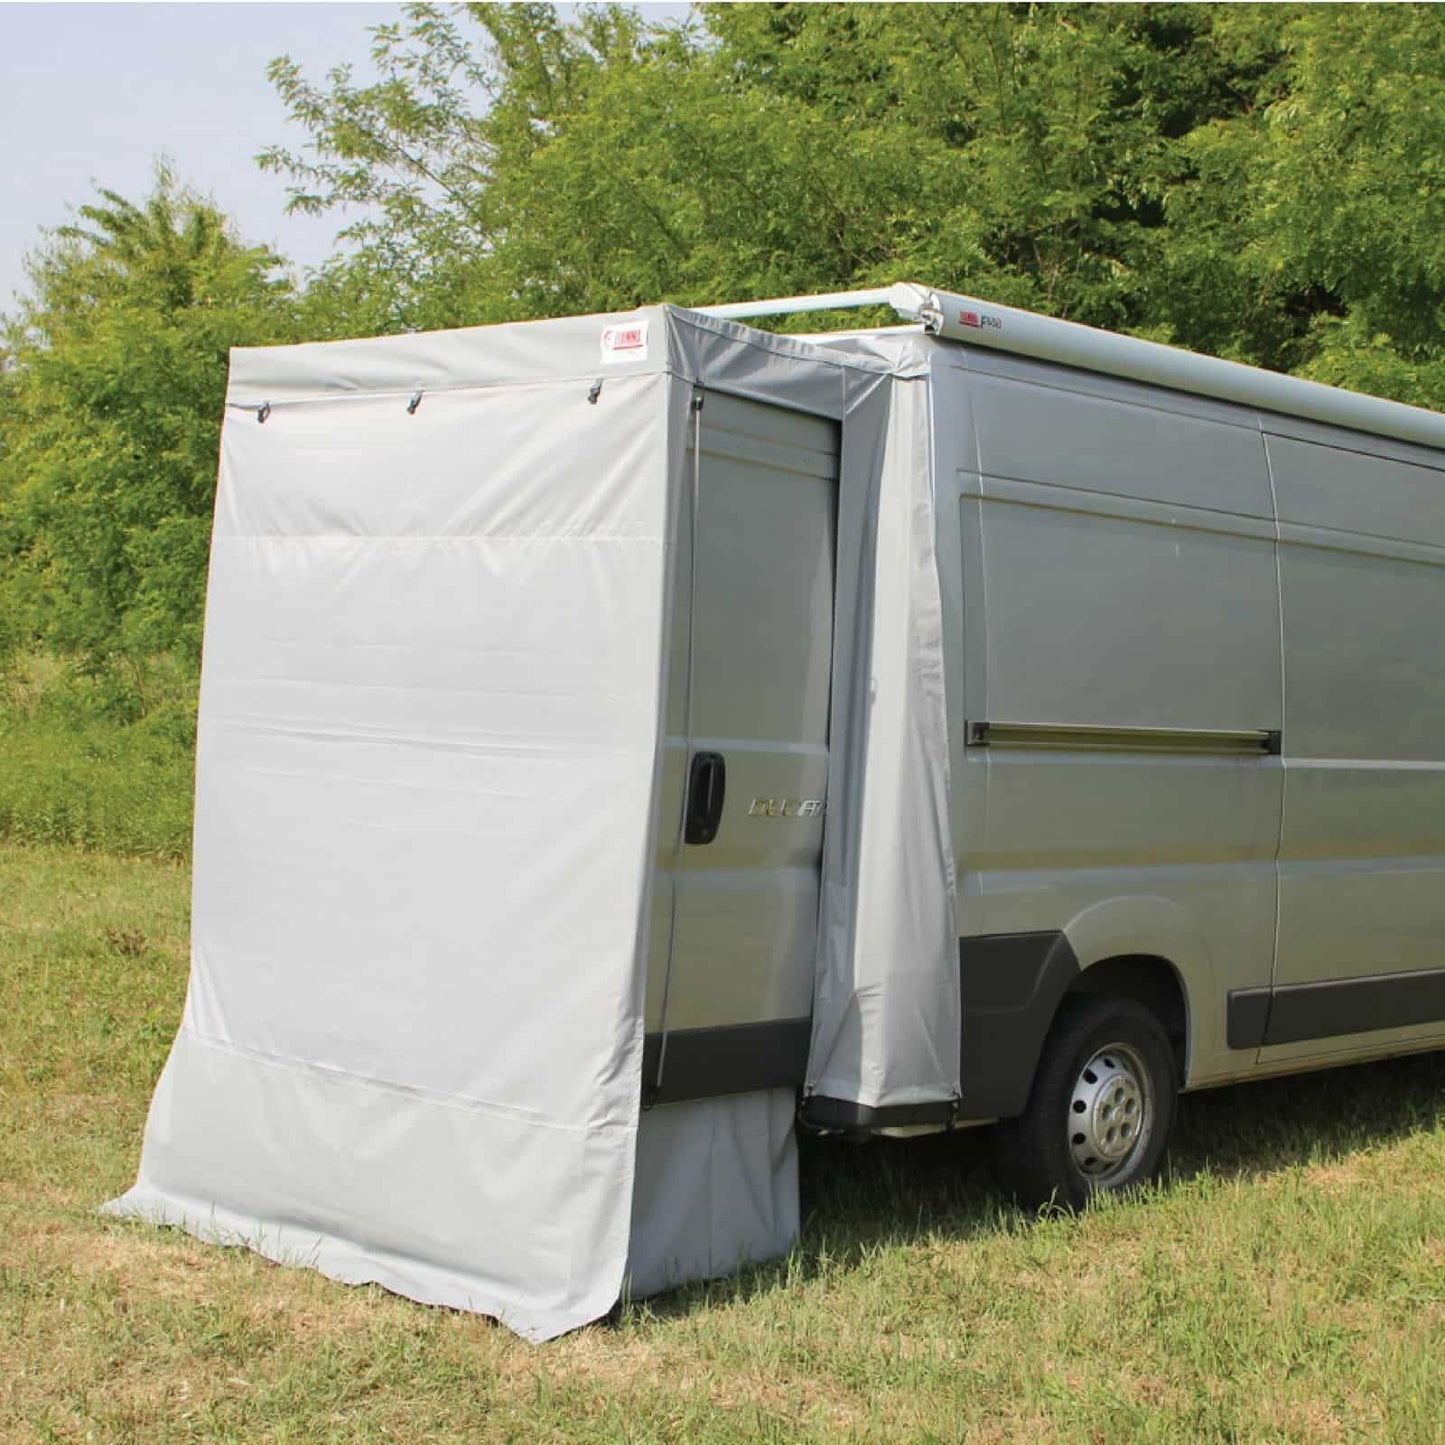 Fiamma Ducato Rear Door Cover Awning made by Fiamma. A Campervan Awning sold by Quality Caravan Awnings